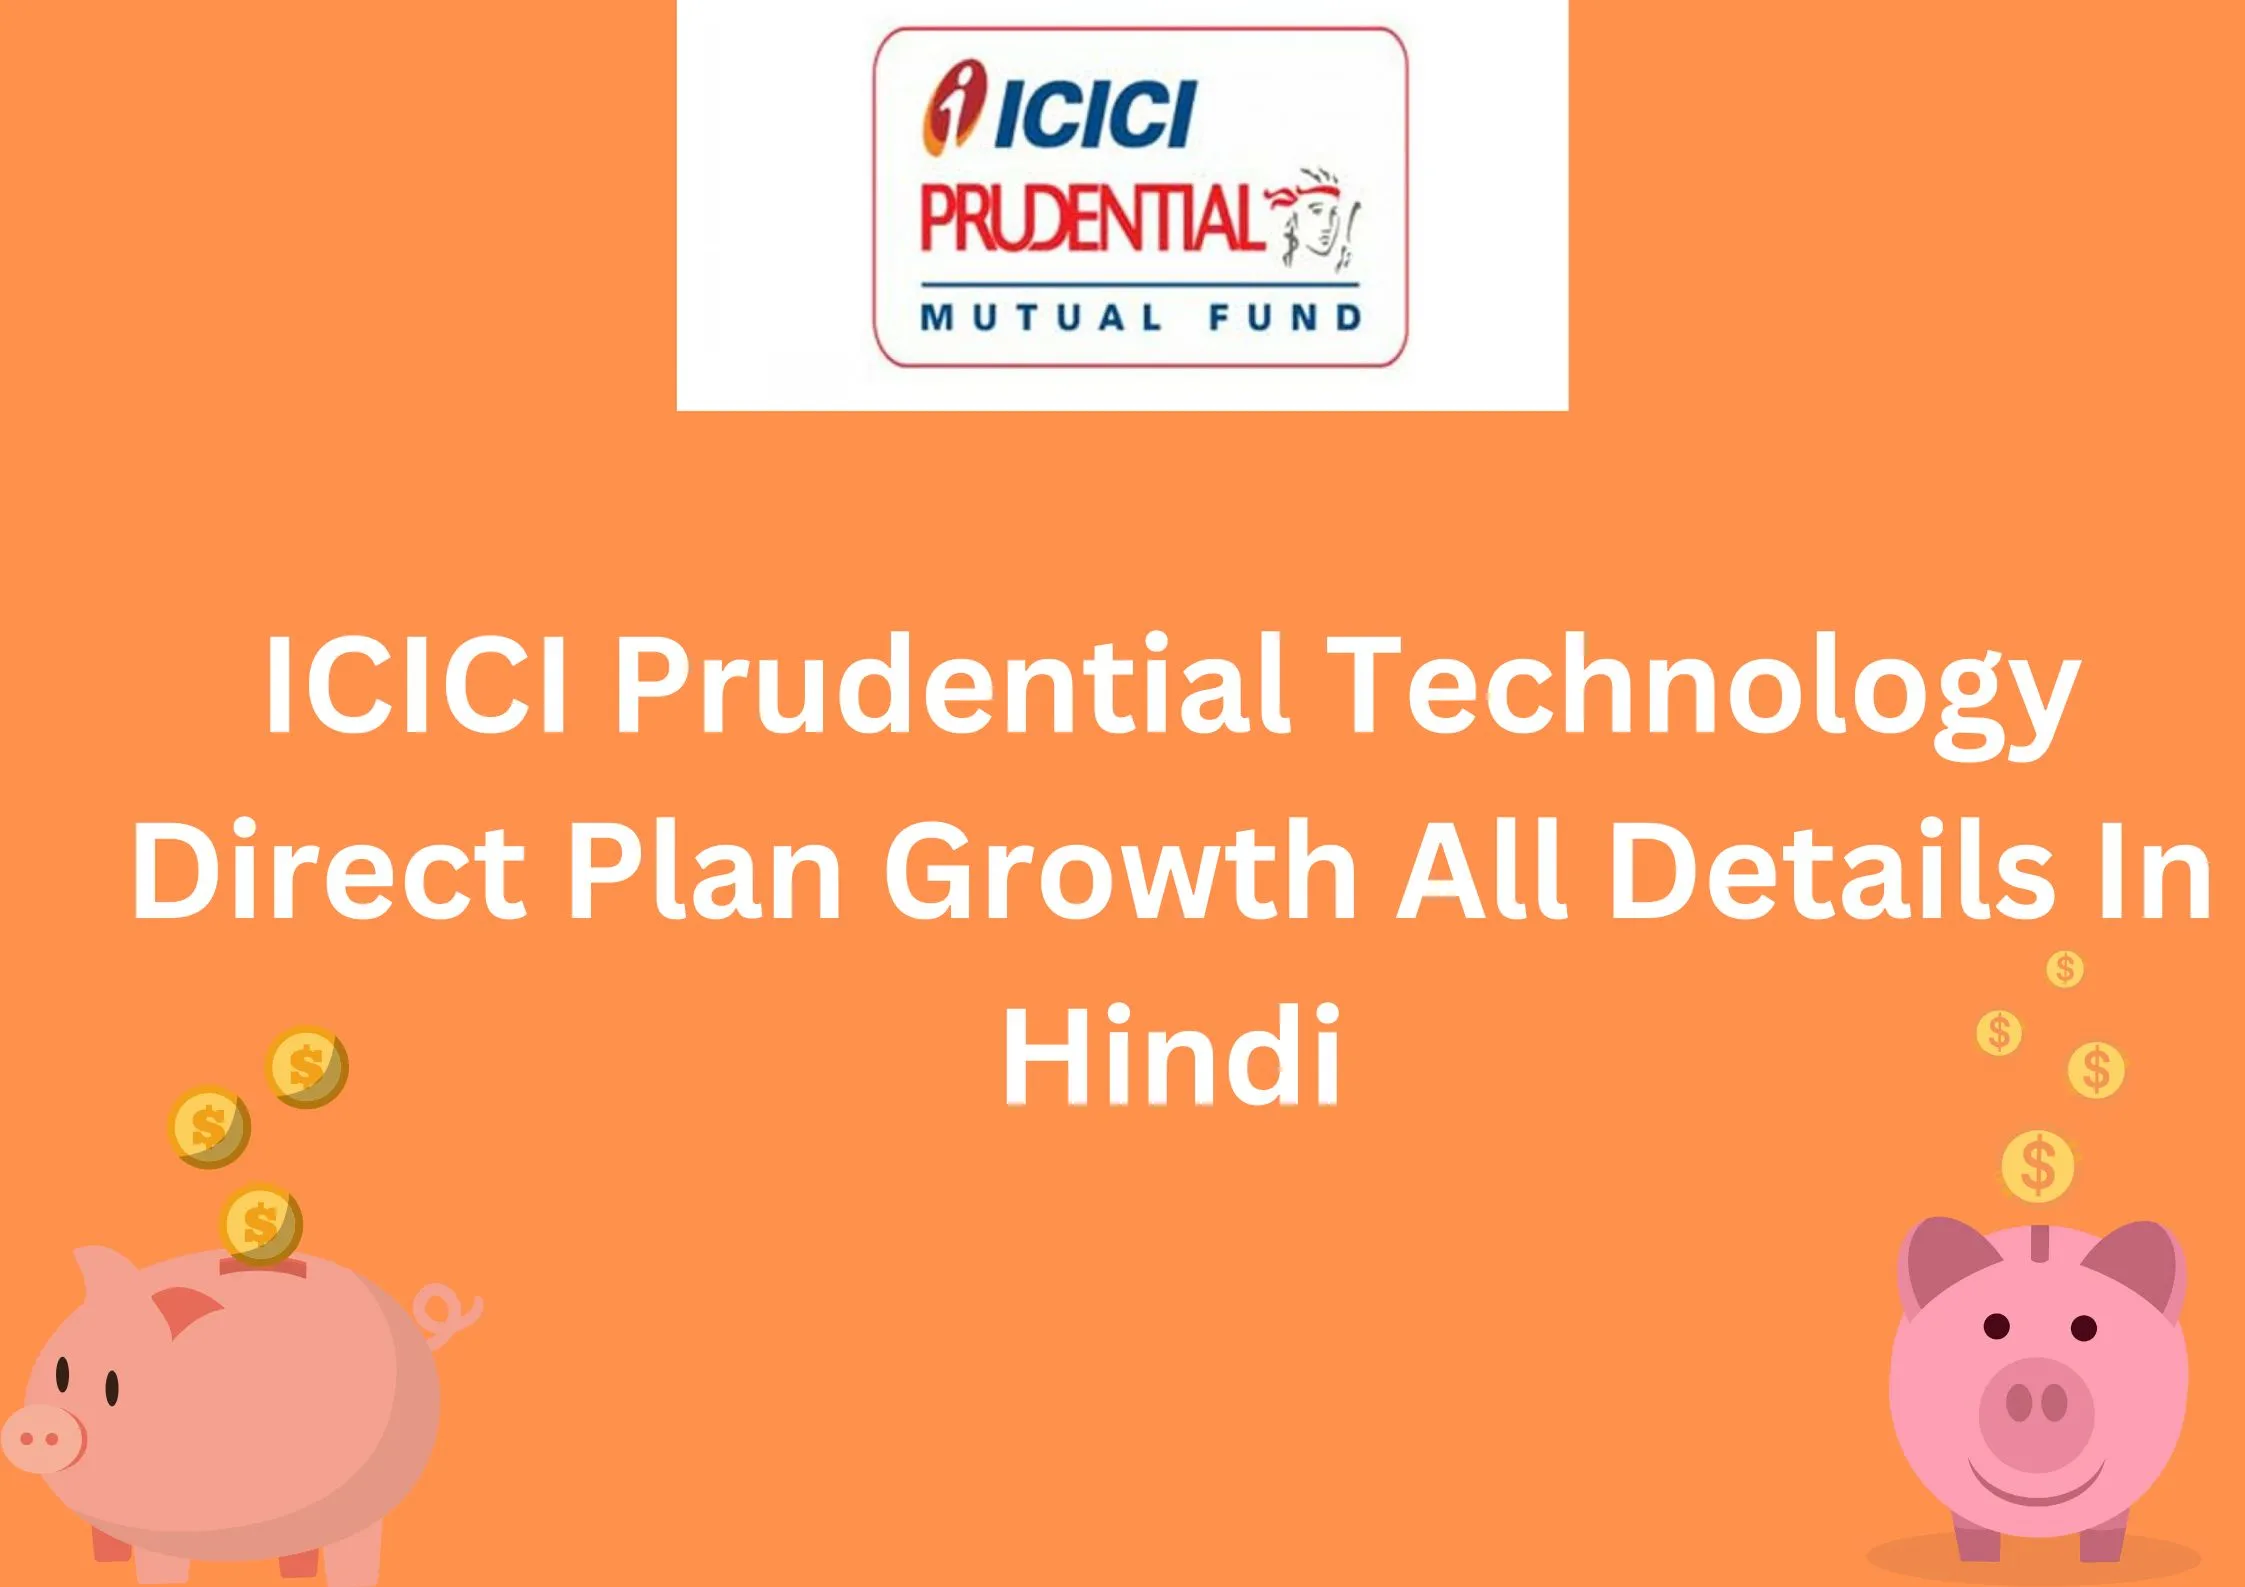 ICICI Prudential Technology Direct Plan Growth